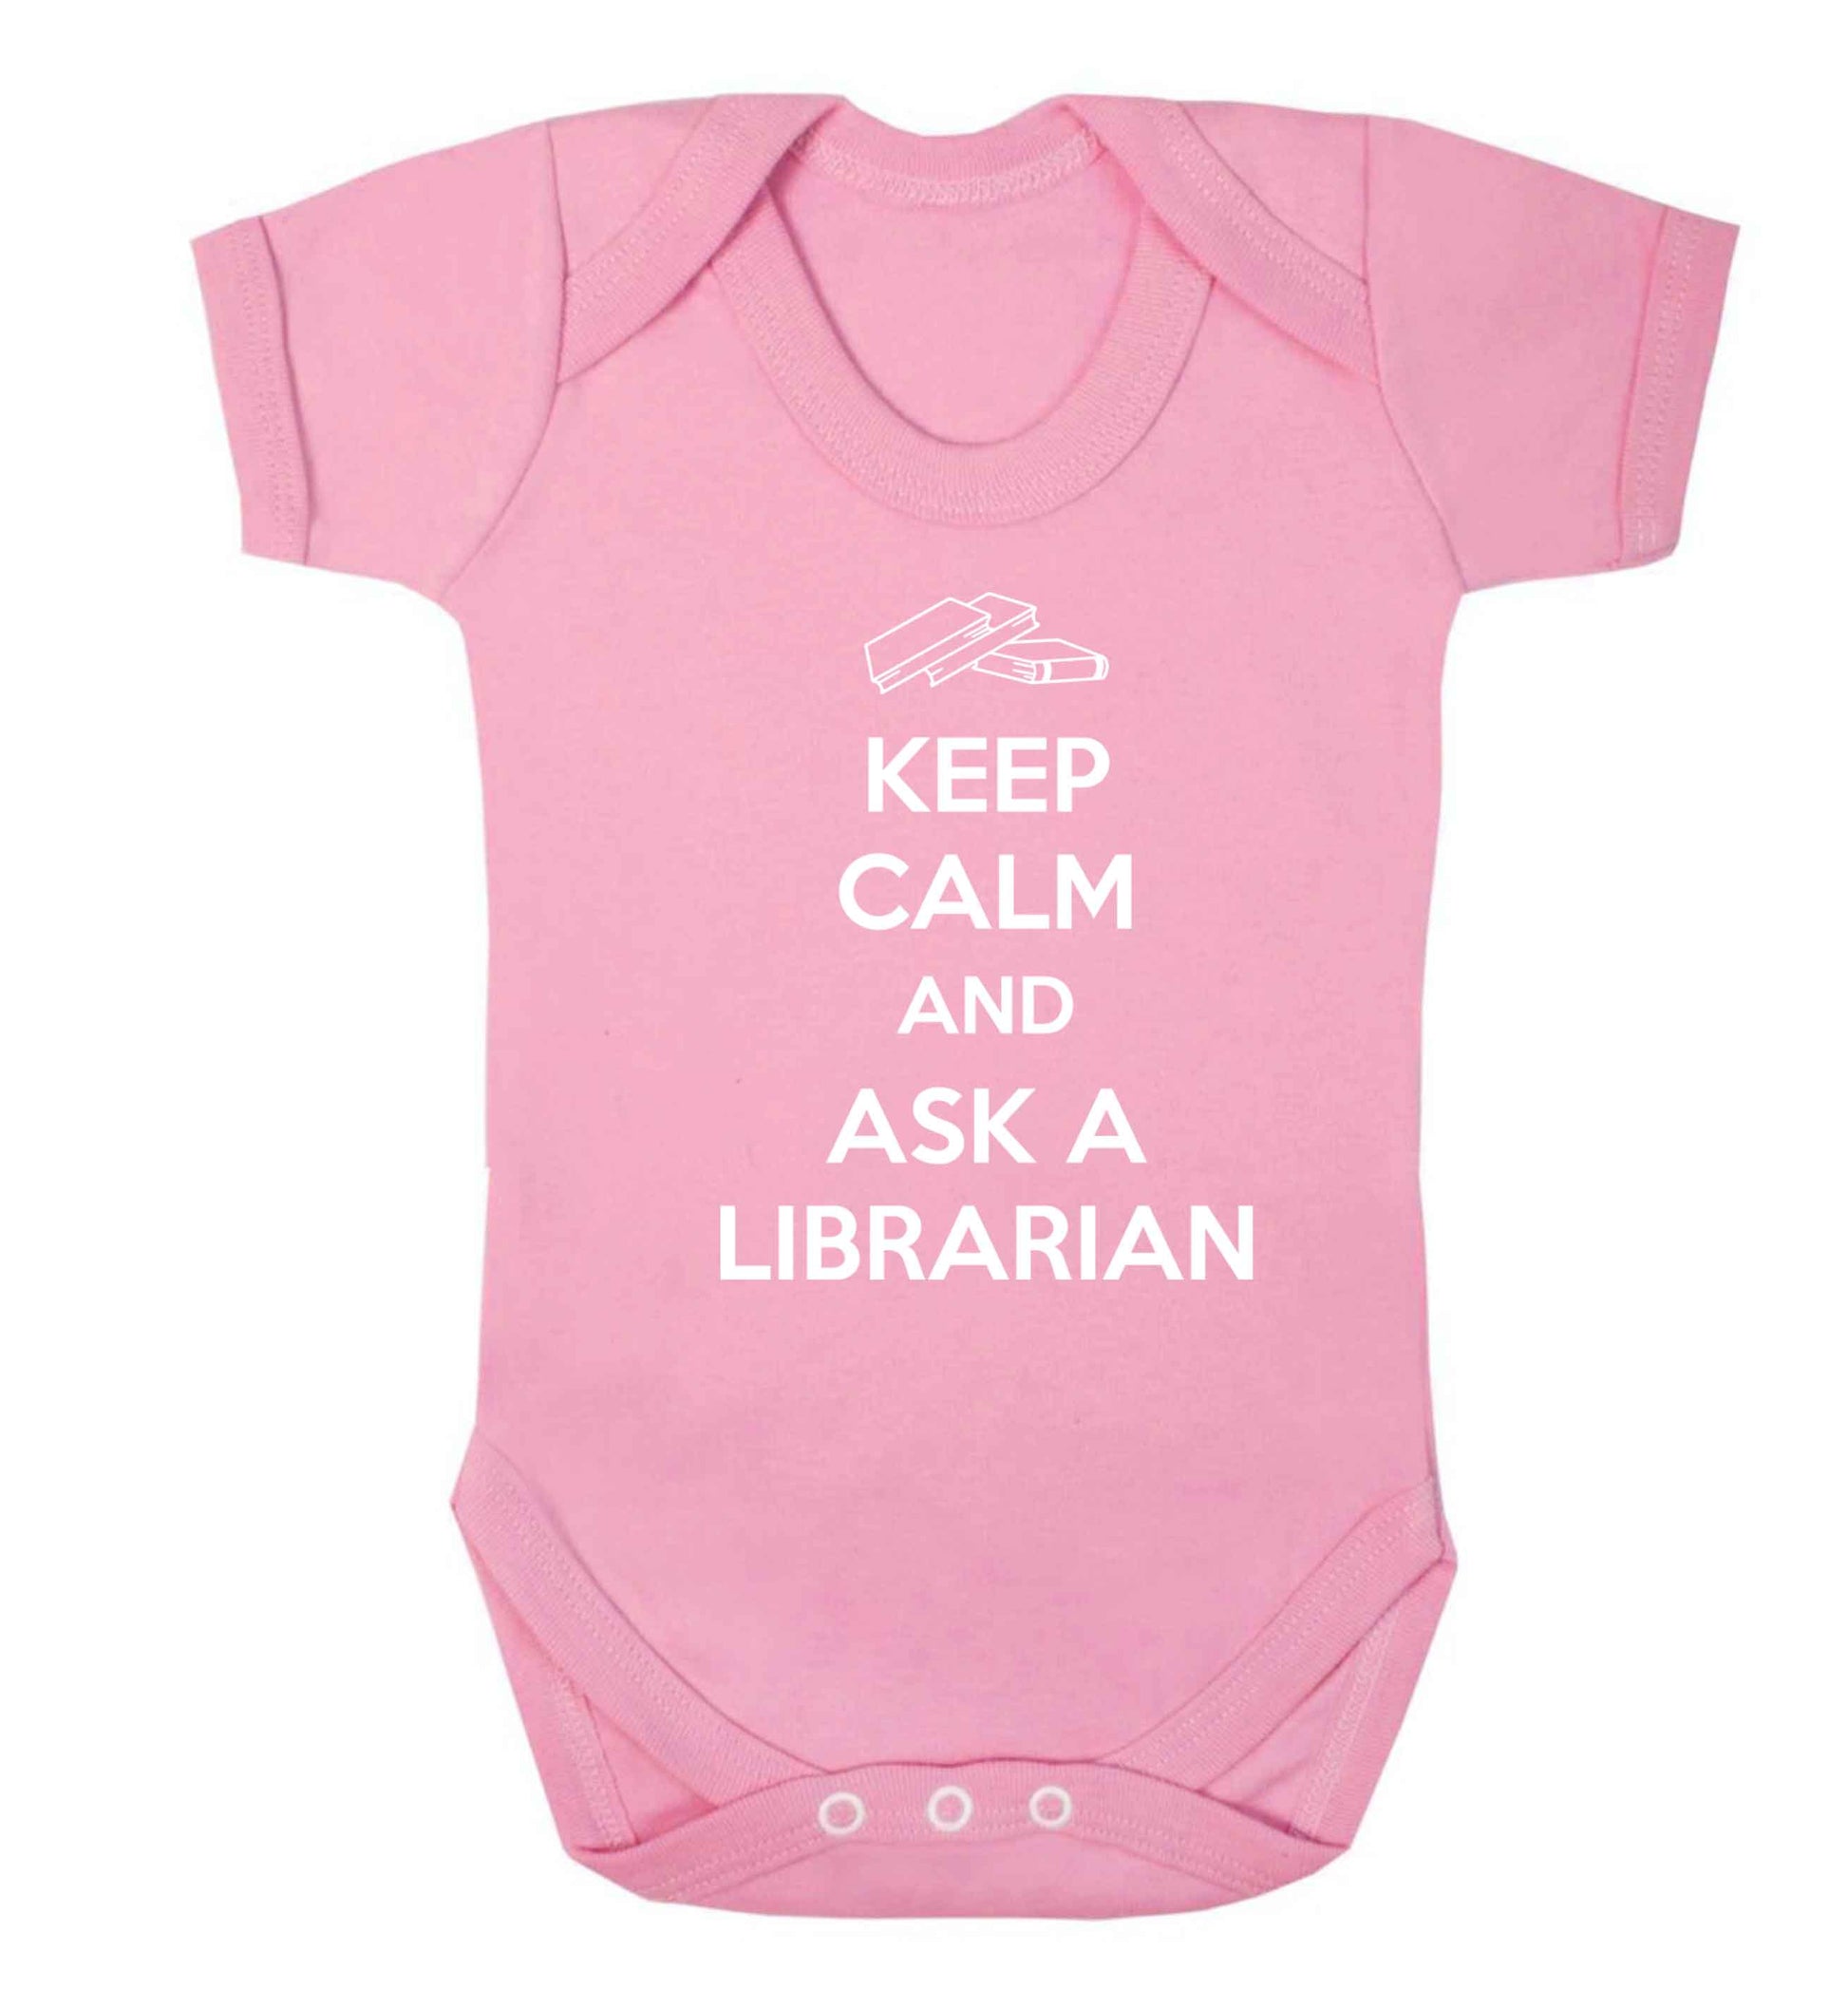 Keep calm and ask a librarian Baby Vest pale pink 18-24 months